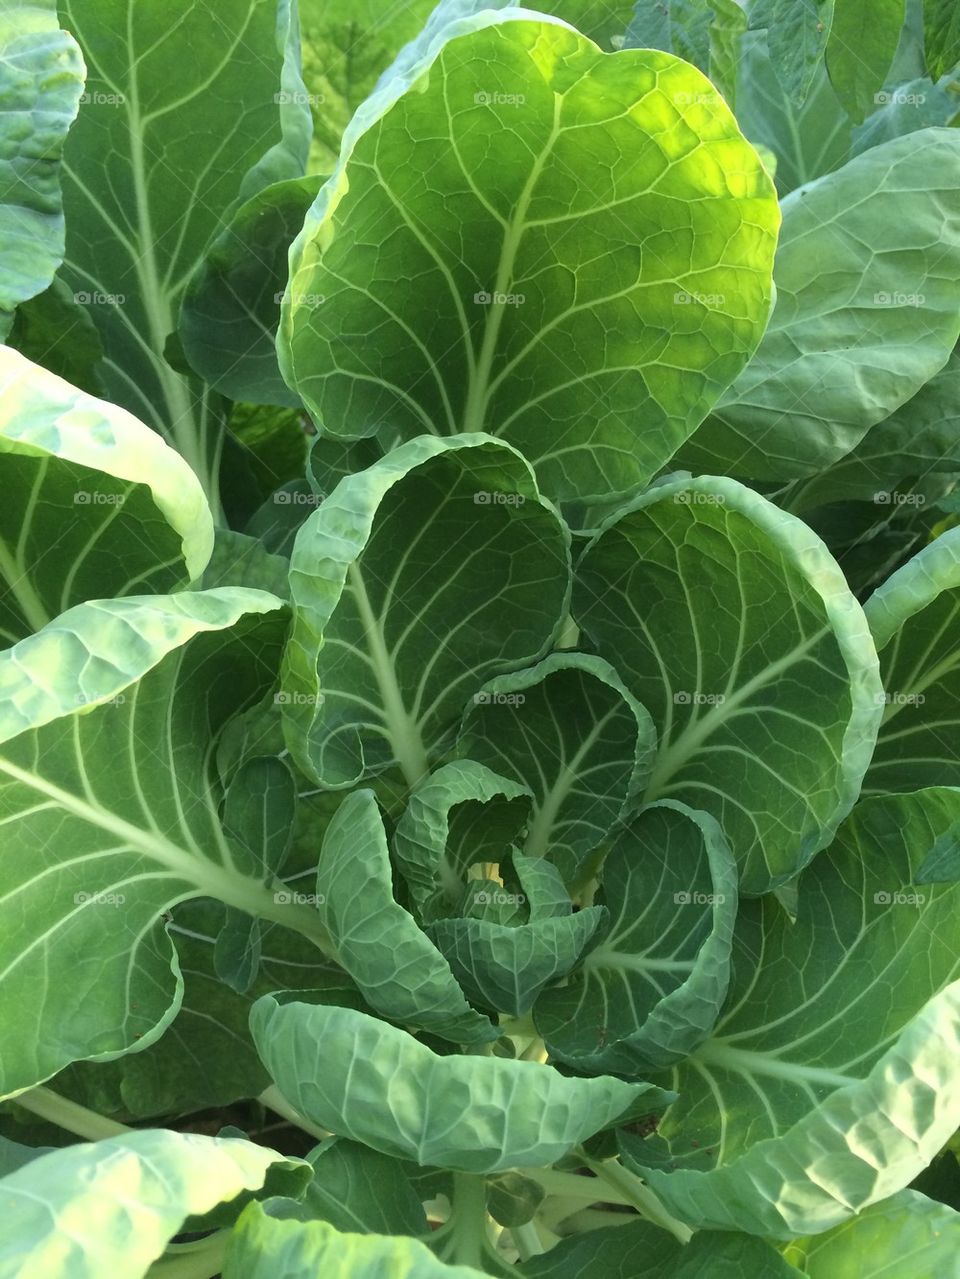 Young collards